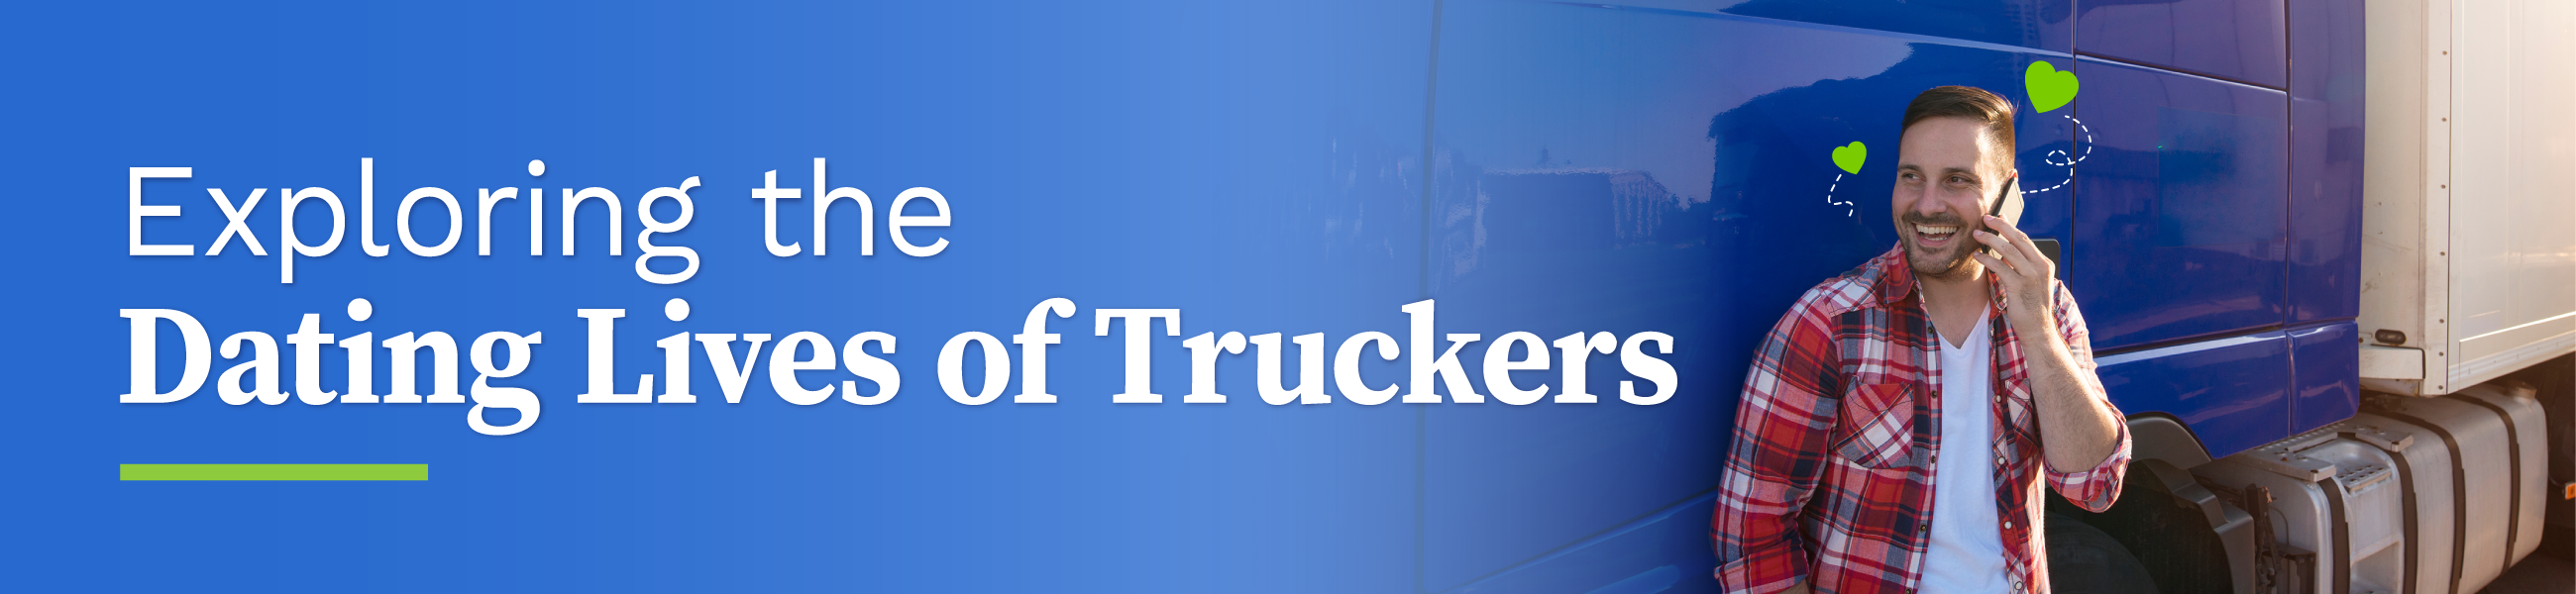 Header: Exploring the dating lives of truckers